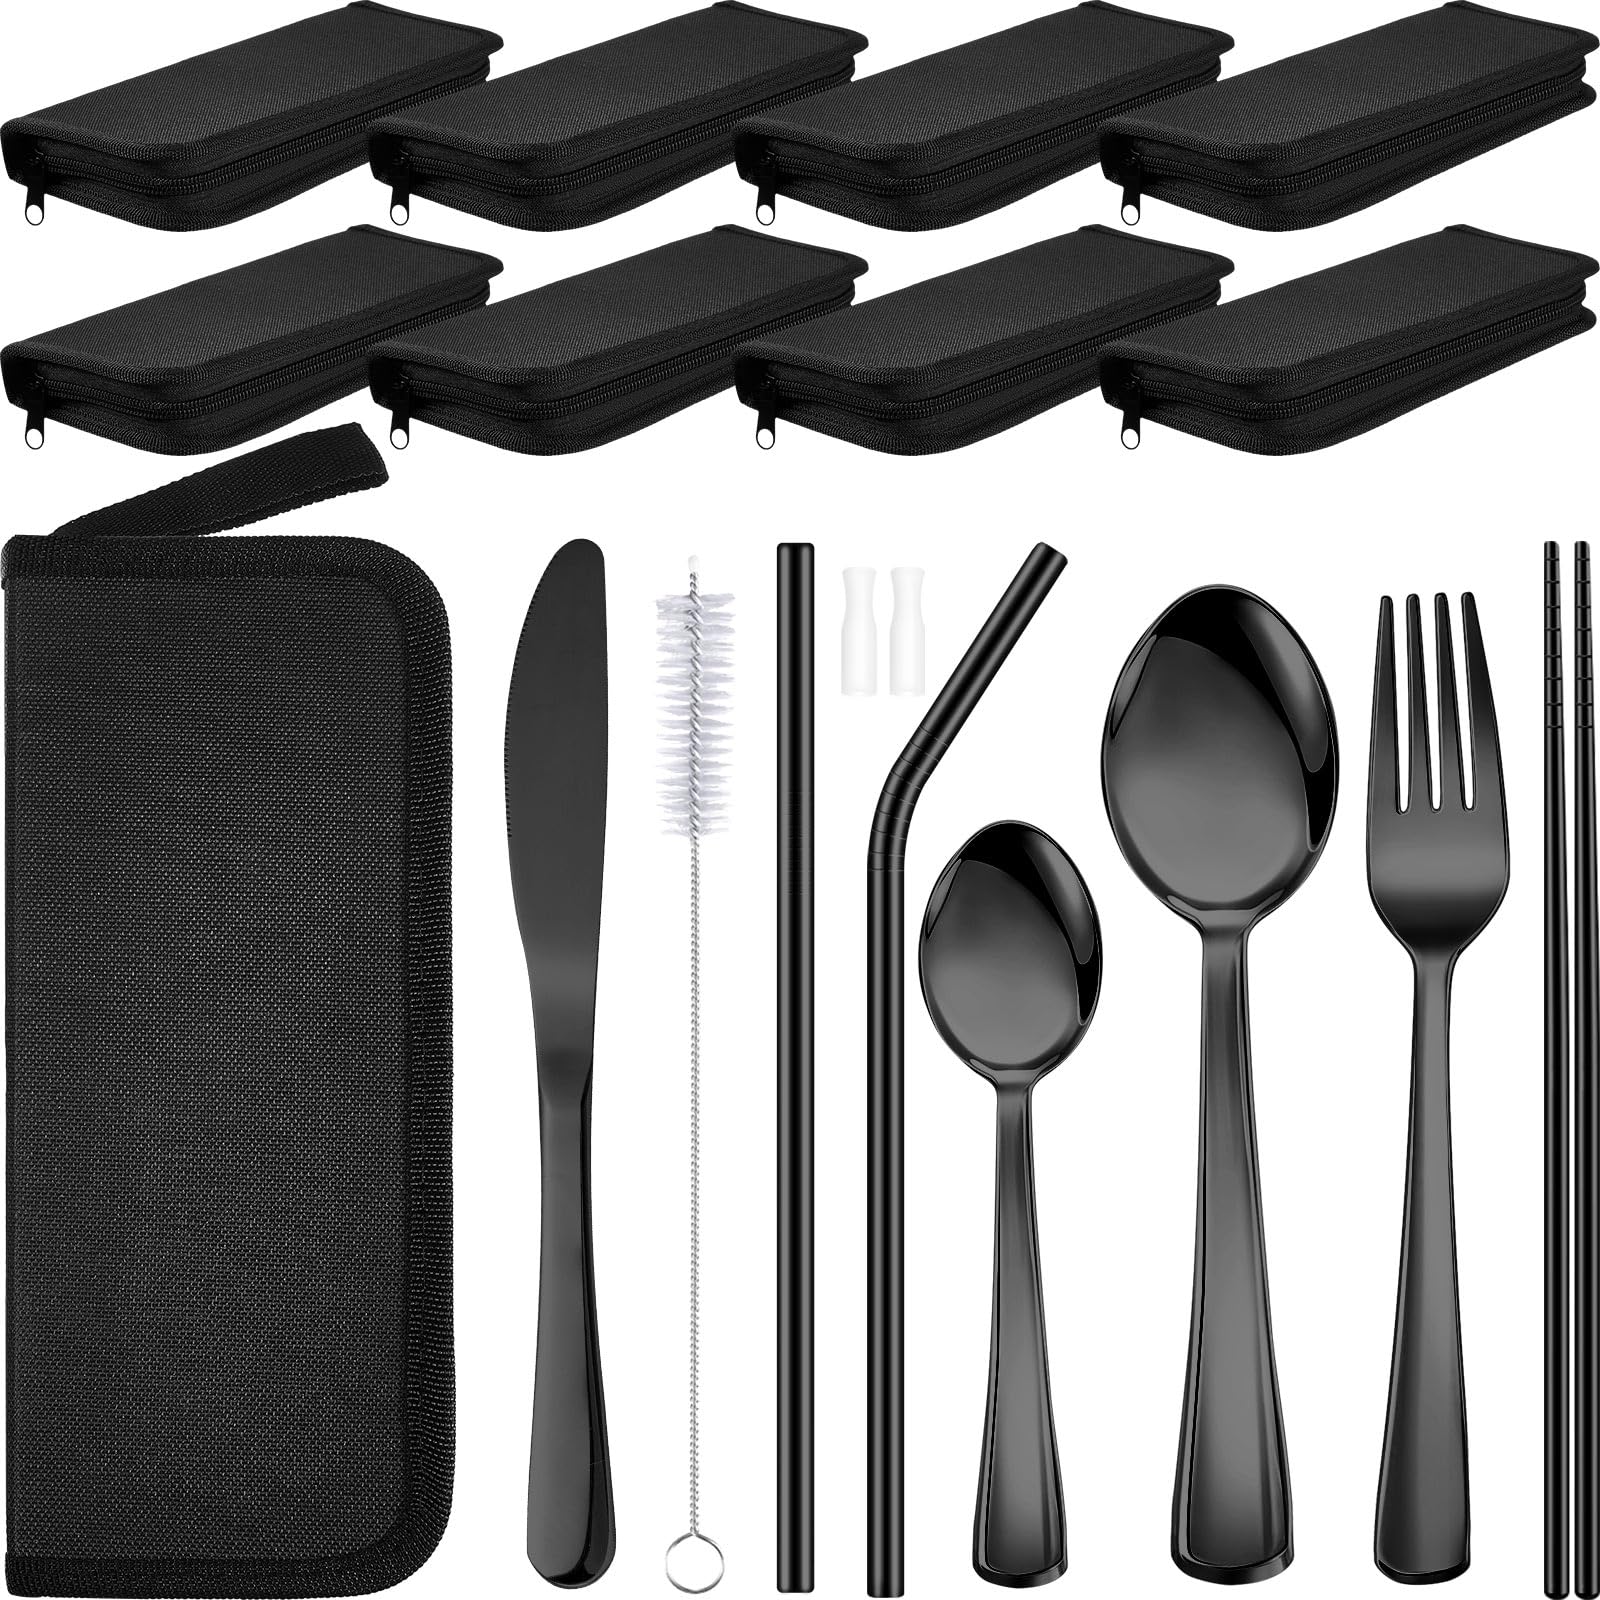 Ziliny 10 Sets Portable Camping Utensils SetTravel Utensils with Case Stainless Steel Reusable Silverware 90Pcs Camping Picn